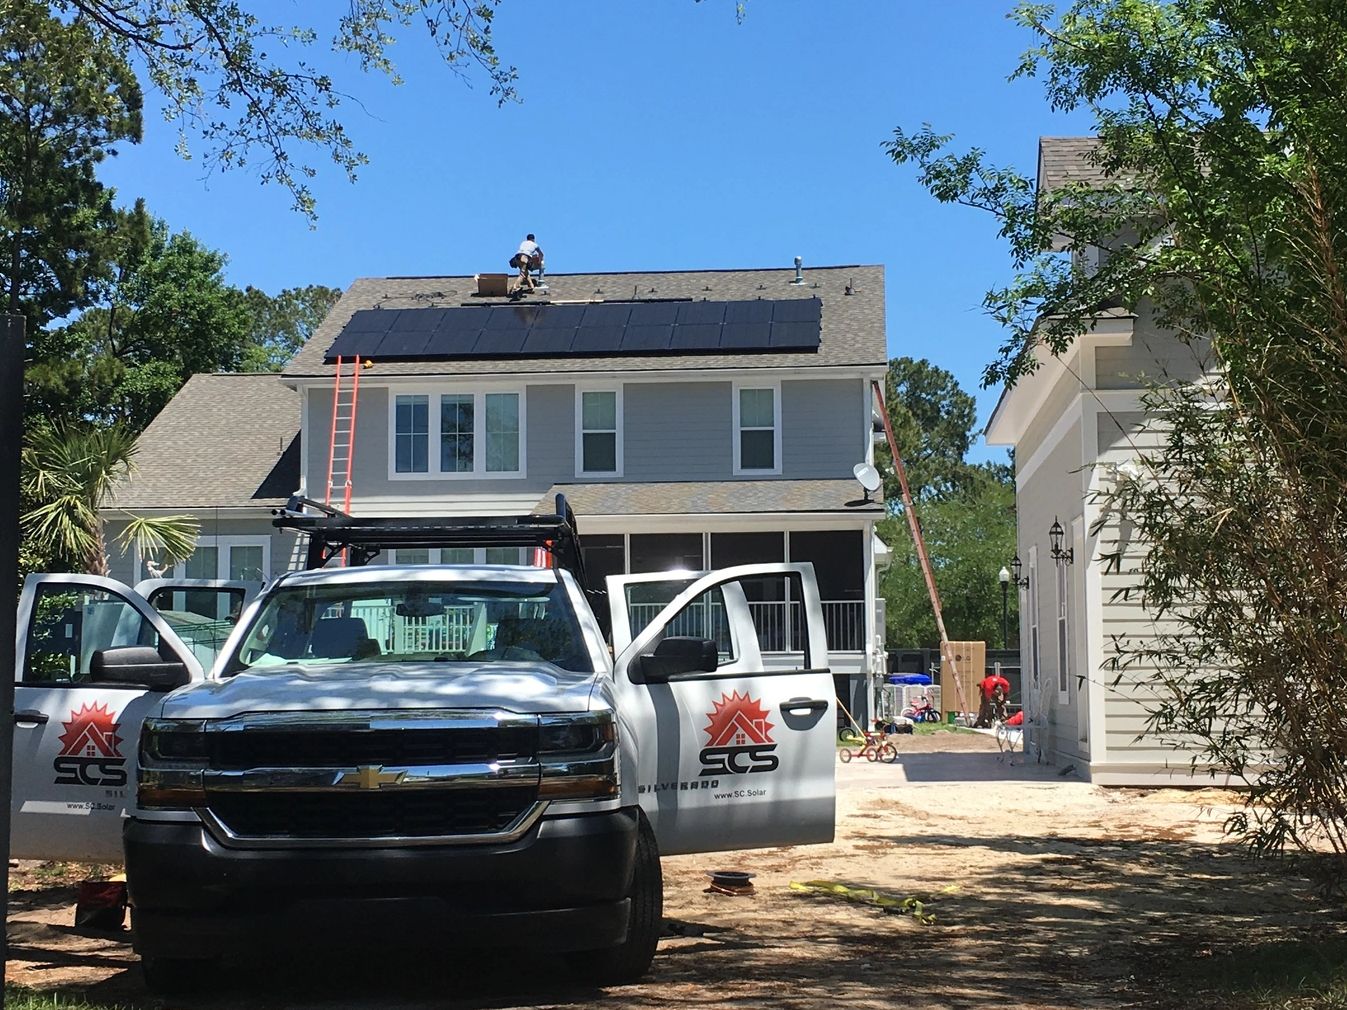 South Carolina Solar installing a roof top solar energy system with LG solar lanels